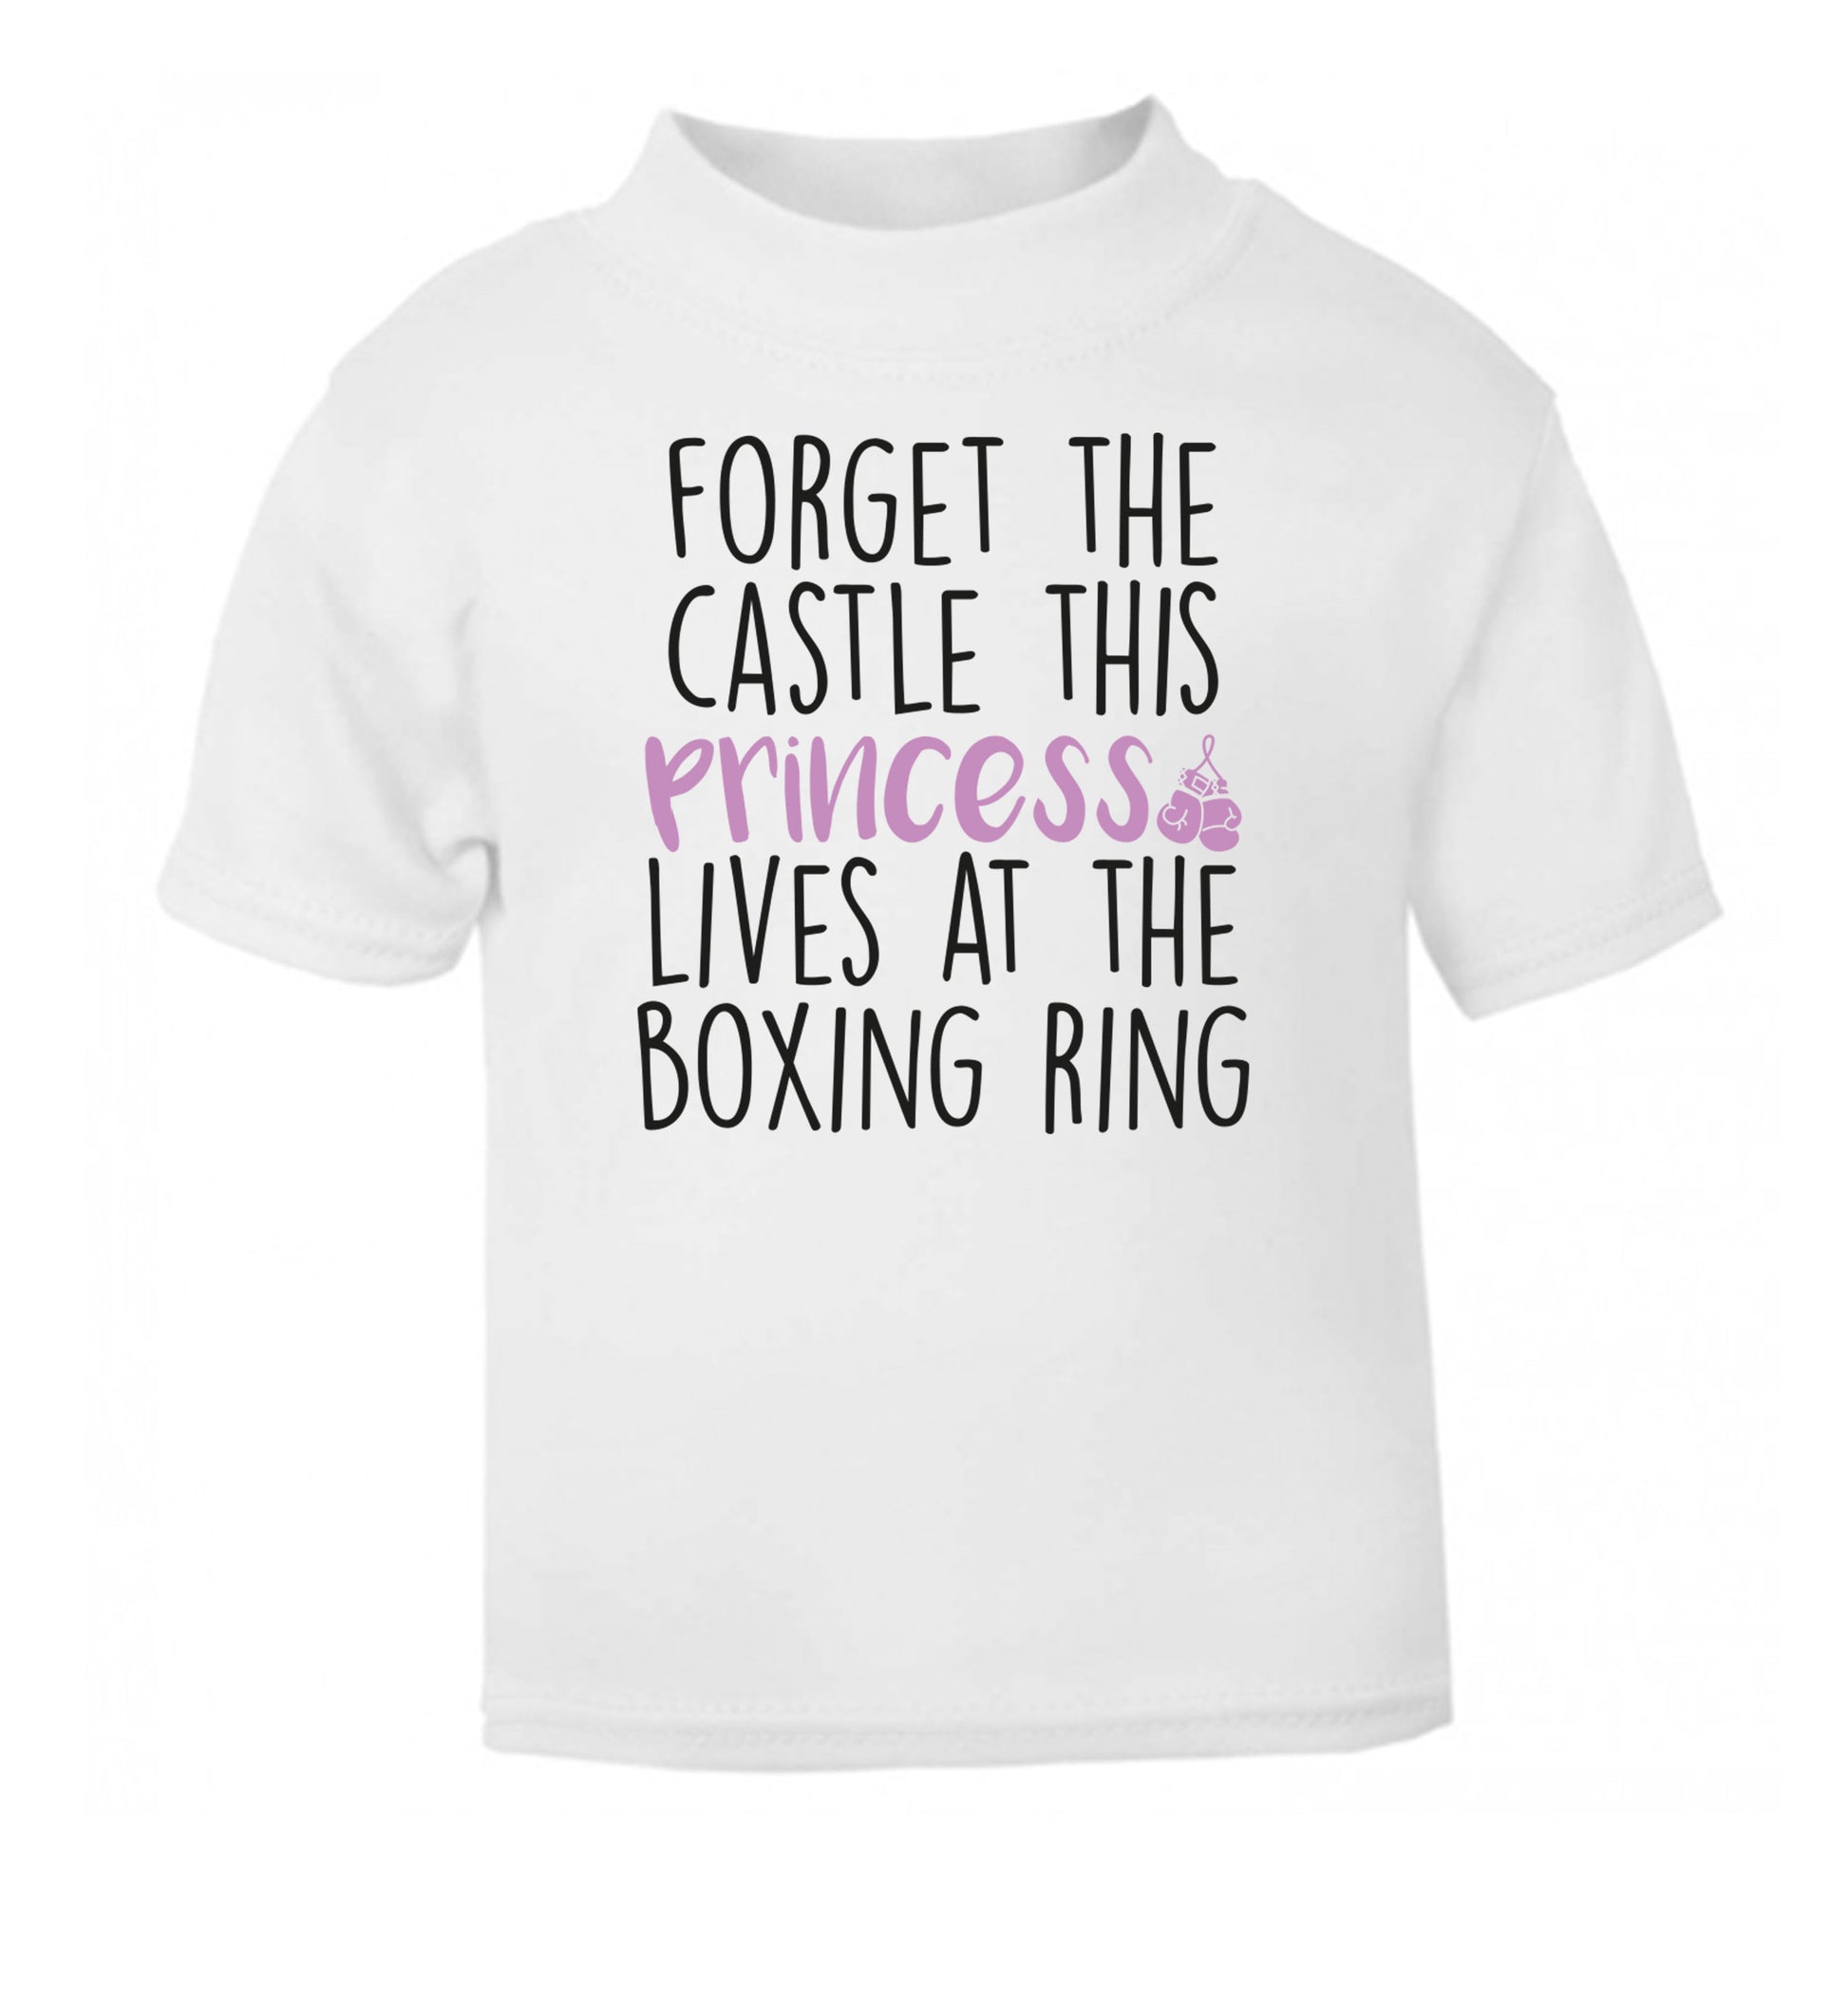 Forget the castle this princess lives at the boxing ring white Baby Toddler Tshirt 2 Years